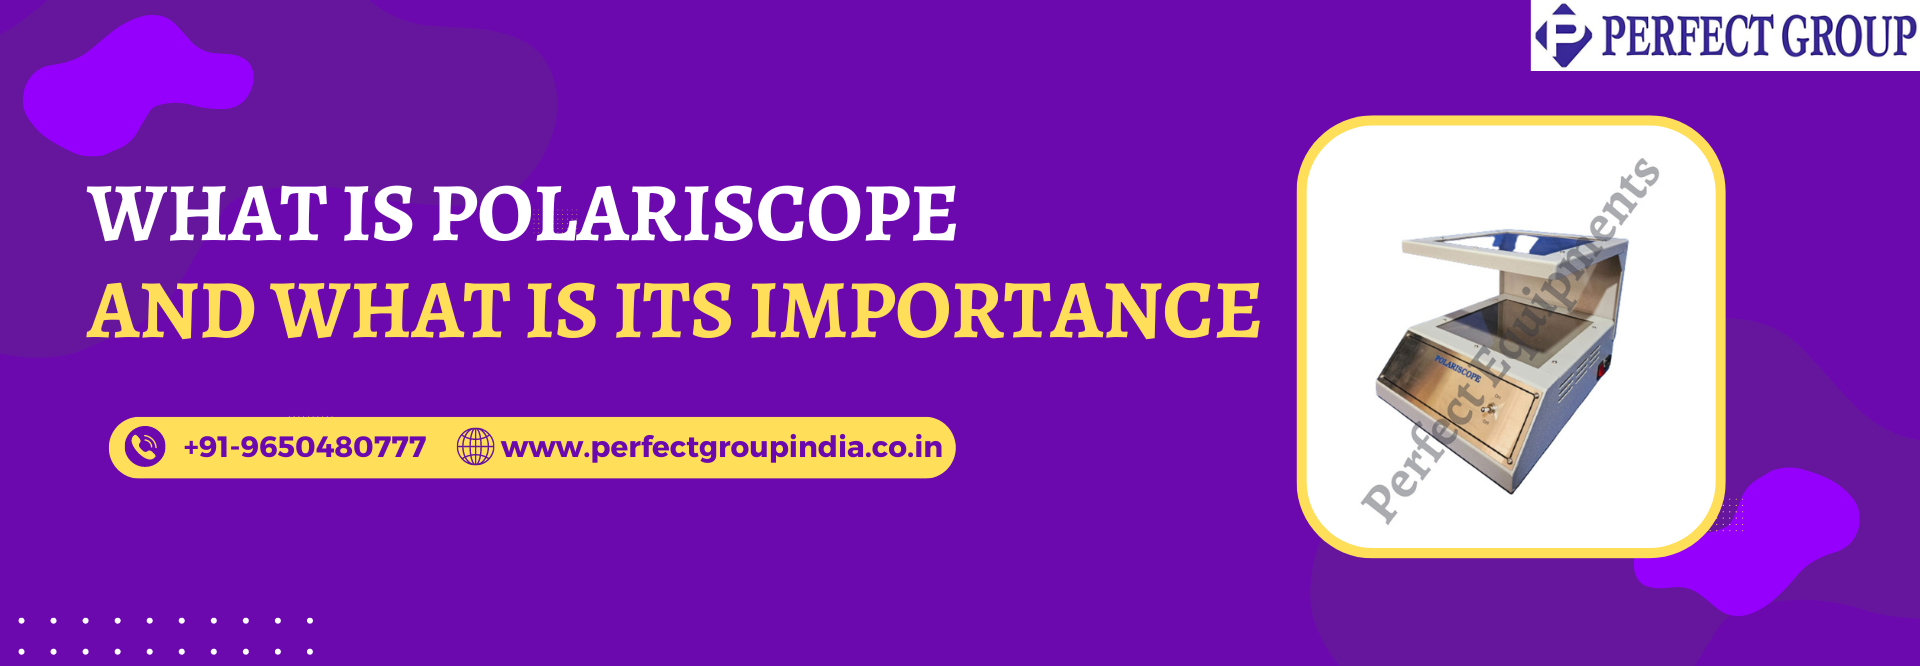 What Is Polariscope And What Is Its Importance